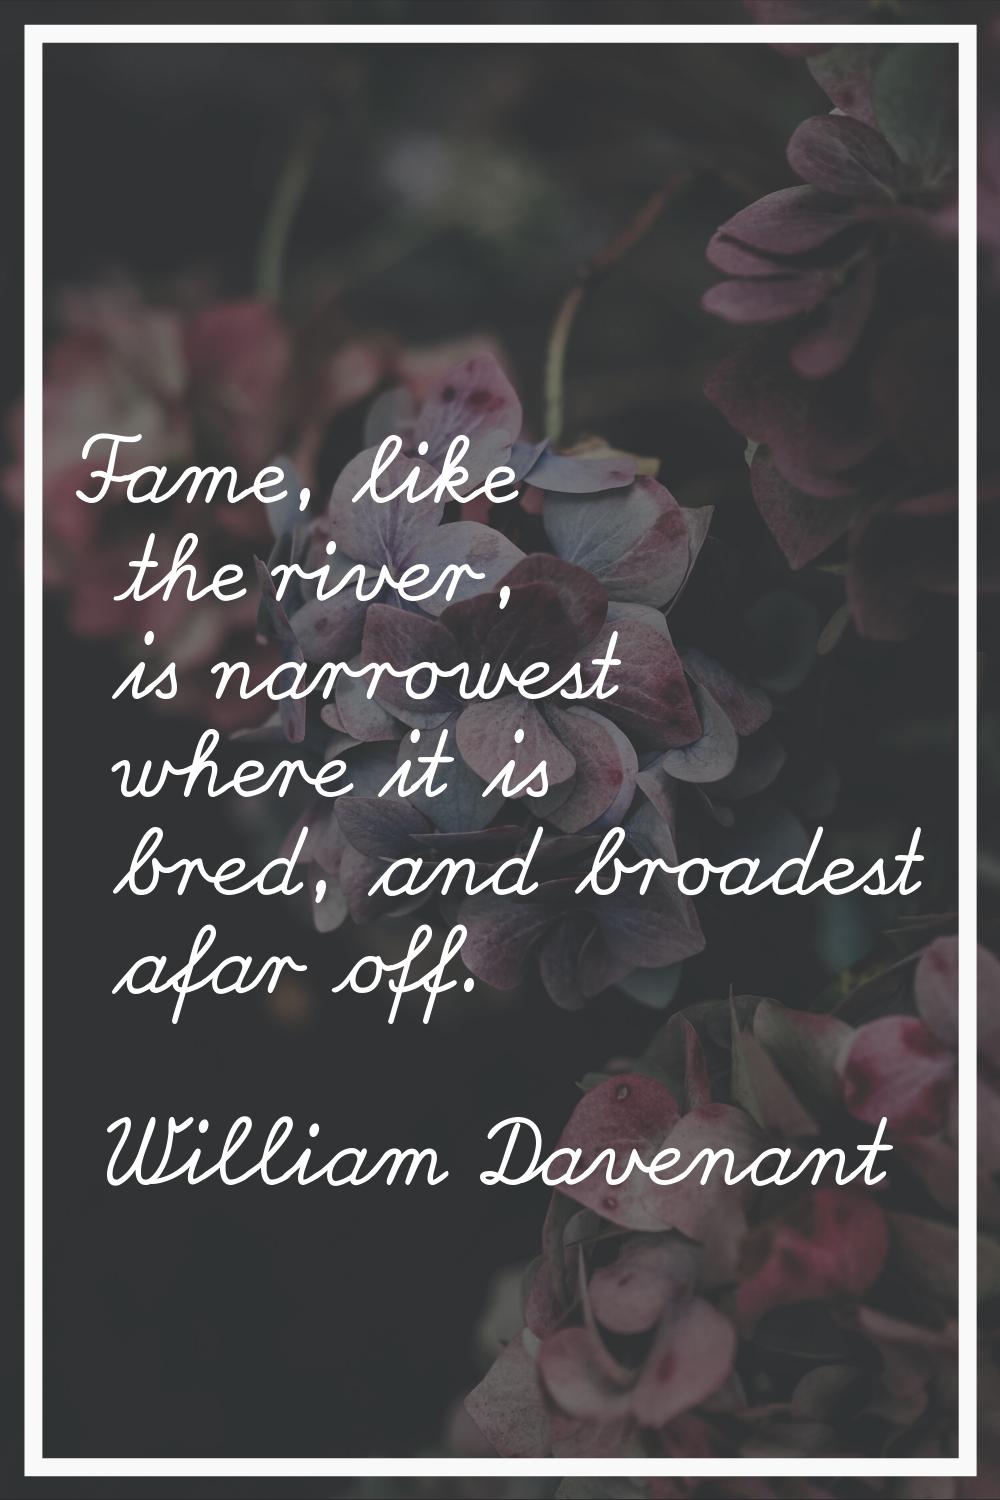 Fame, like the river, is narrowest where it is bred, and broadest afar off.